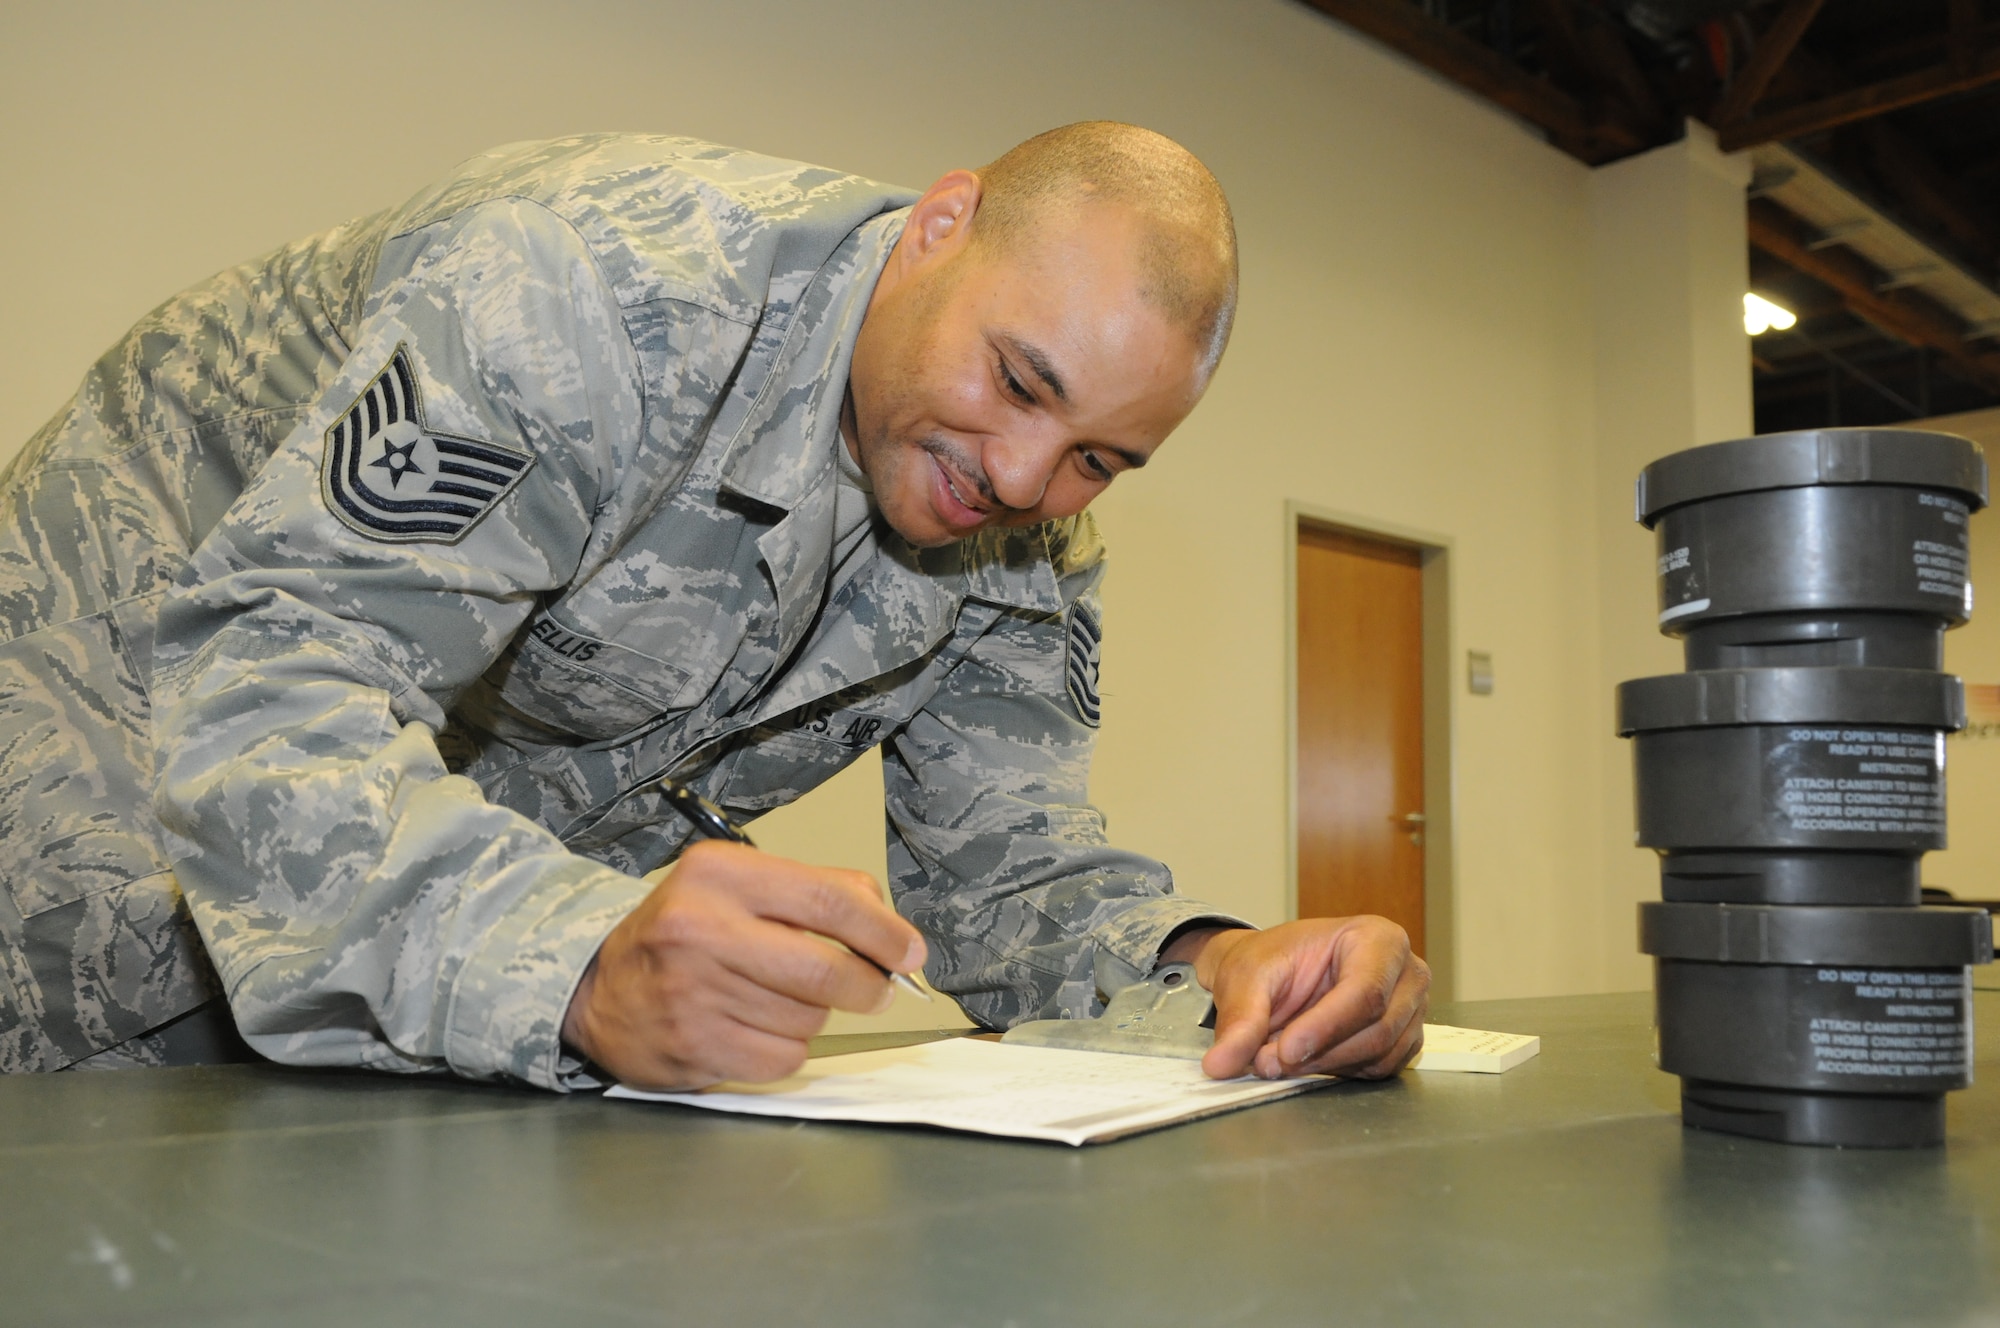 SPANGDAHLEM AIR BASE, Germany – Tech. Sgt. Kenton Ellis, 52nd Logistics Readiness Squadron individual protective equipment NCO in charge, annotates an IPE check sheet during a 100 percent inventory at the IPE warehouse June 7. The inventory was one step of a web migration checklist issued by U.S. Air Forces in Europe that will take place July 5-22.. (U.S. Air Force photo/Senior Airman Nick Wilson)